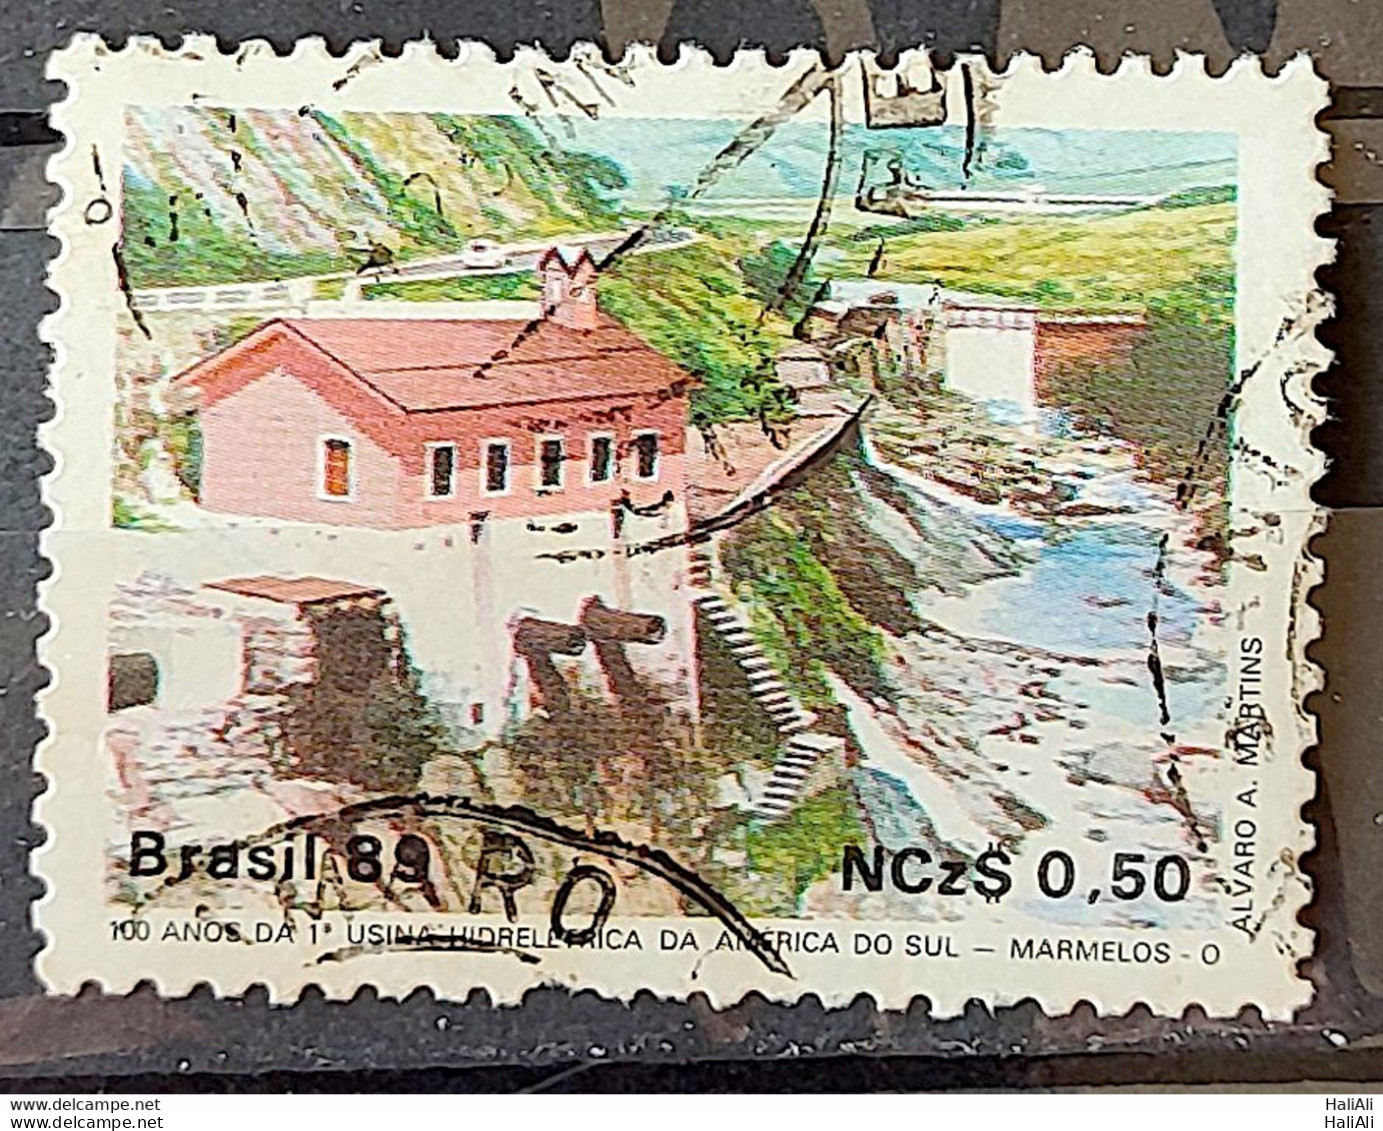 C 1644 Brazil Stamp 100 Years Hydroelectric Marmelos Energy Electricity Juiz De Fora 1989 Circulated 31 - Used Stamps